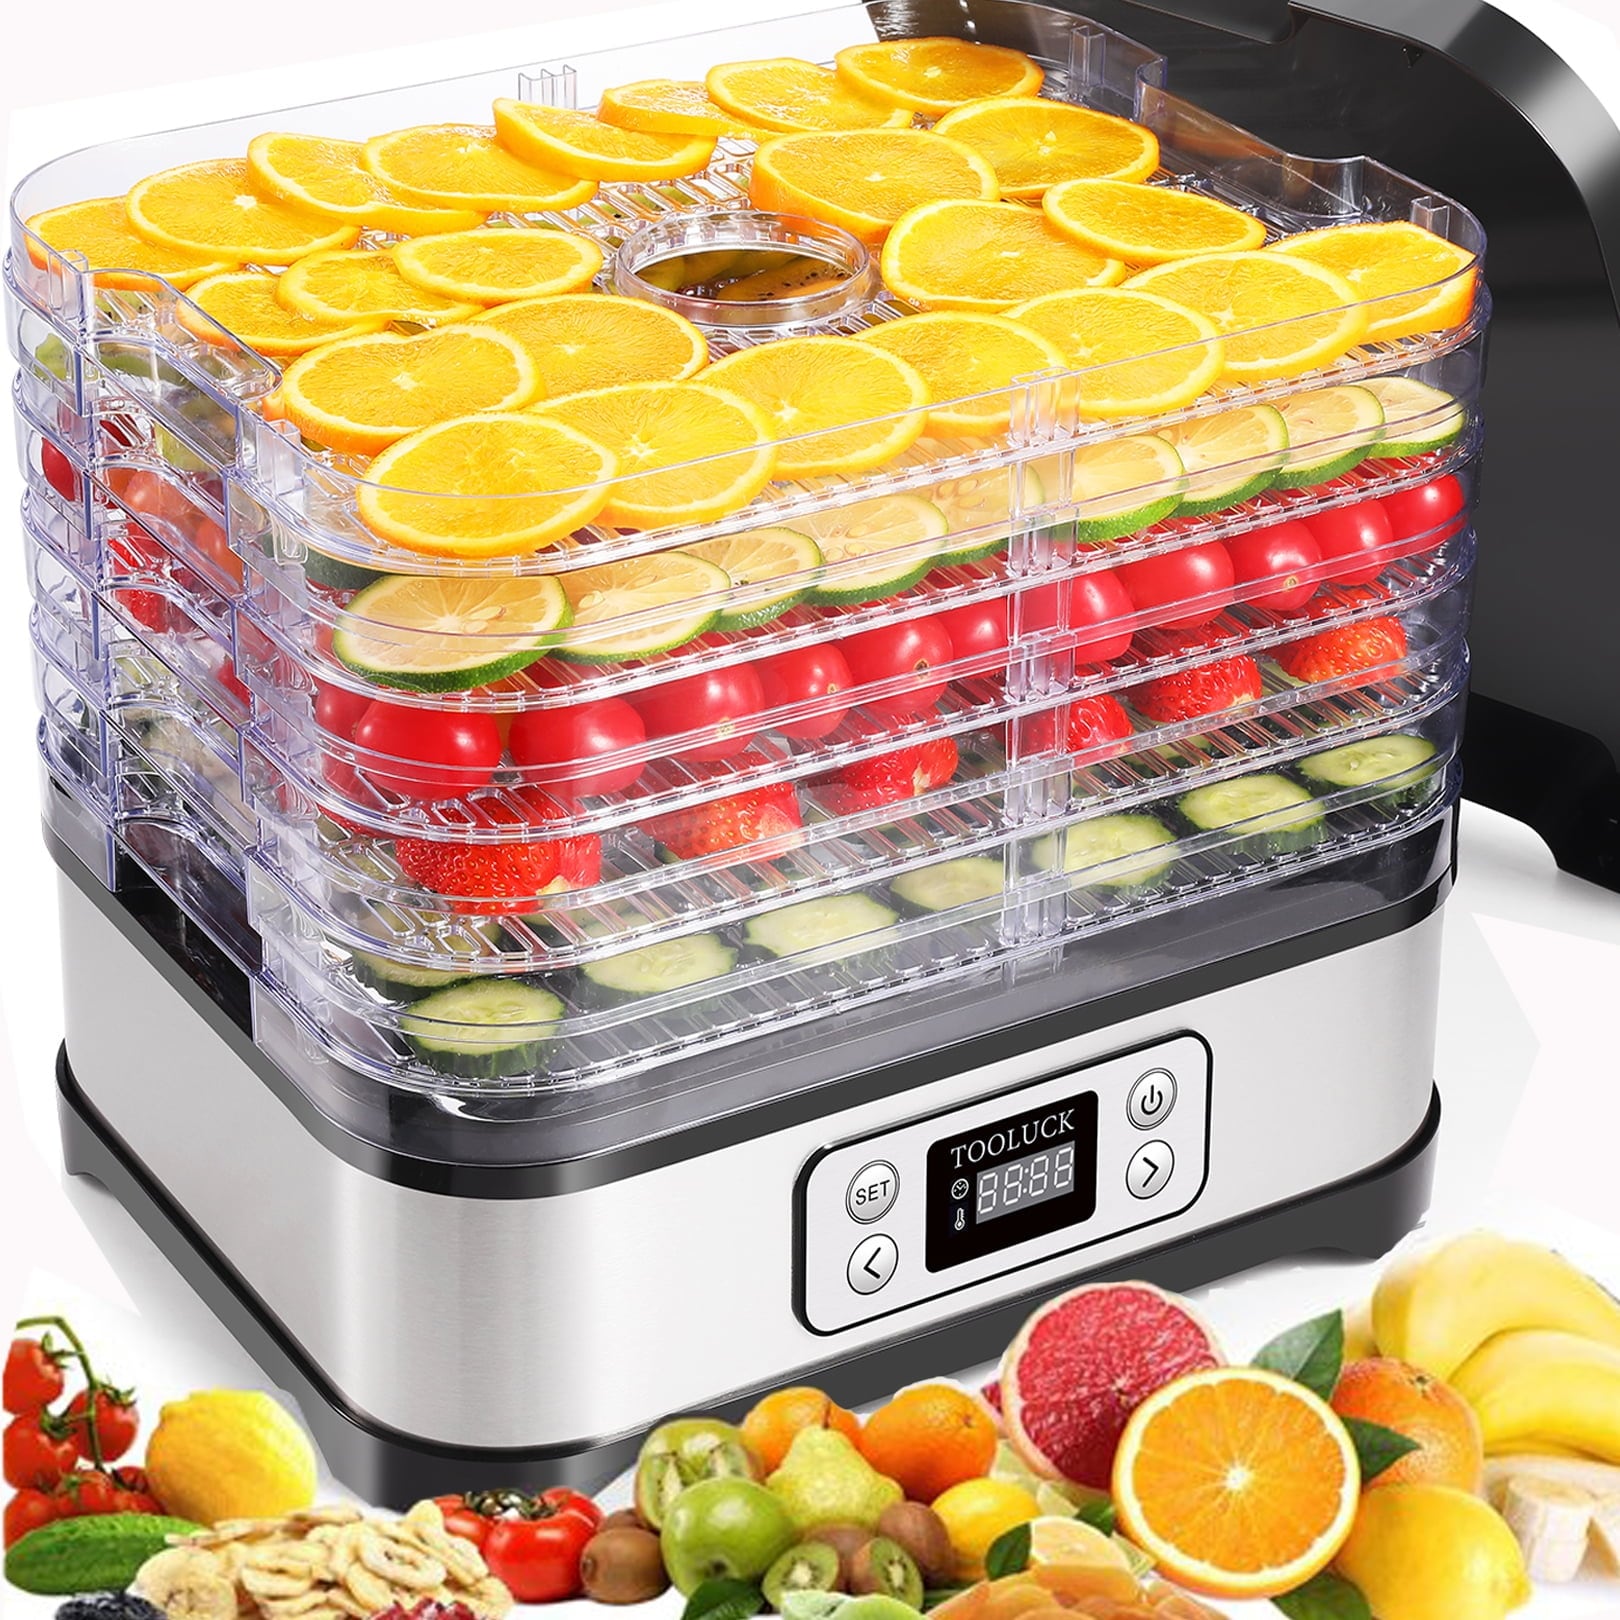 https://ak1.ostkcdn.com/images/products/is/images/direct/36aba45ab2092cae5e310d7ec6bb98b21ab3c80b/TOOLUCK-Electric-Food-Dehydrator-Machine%2C250W-Power%2CTimer-and-Temperature-Settings%2C-5-Drying-Trays%2C-Stainless-Steel.jpg